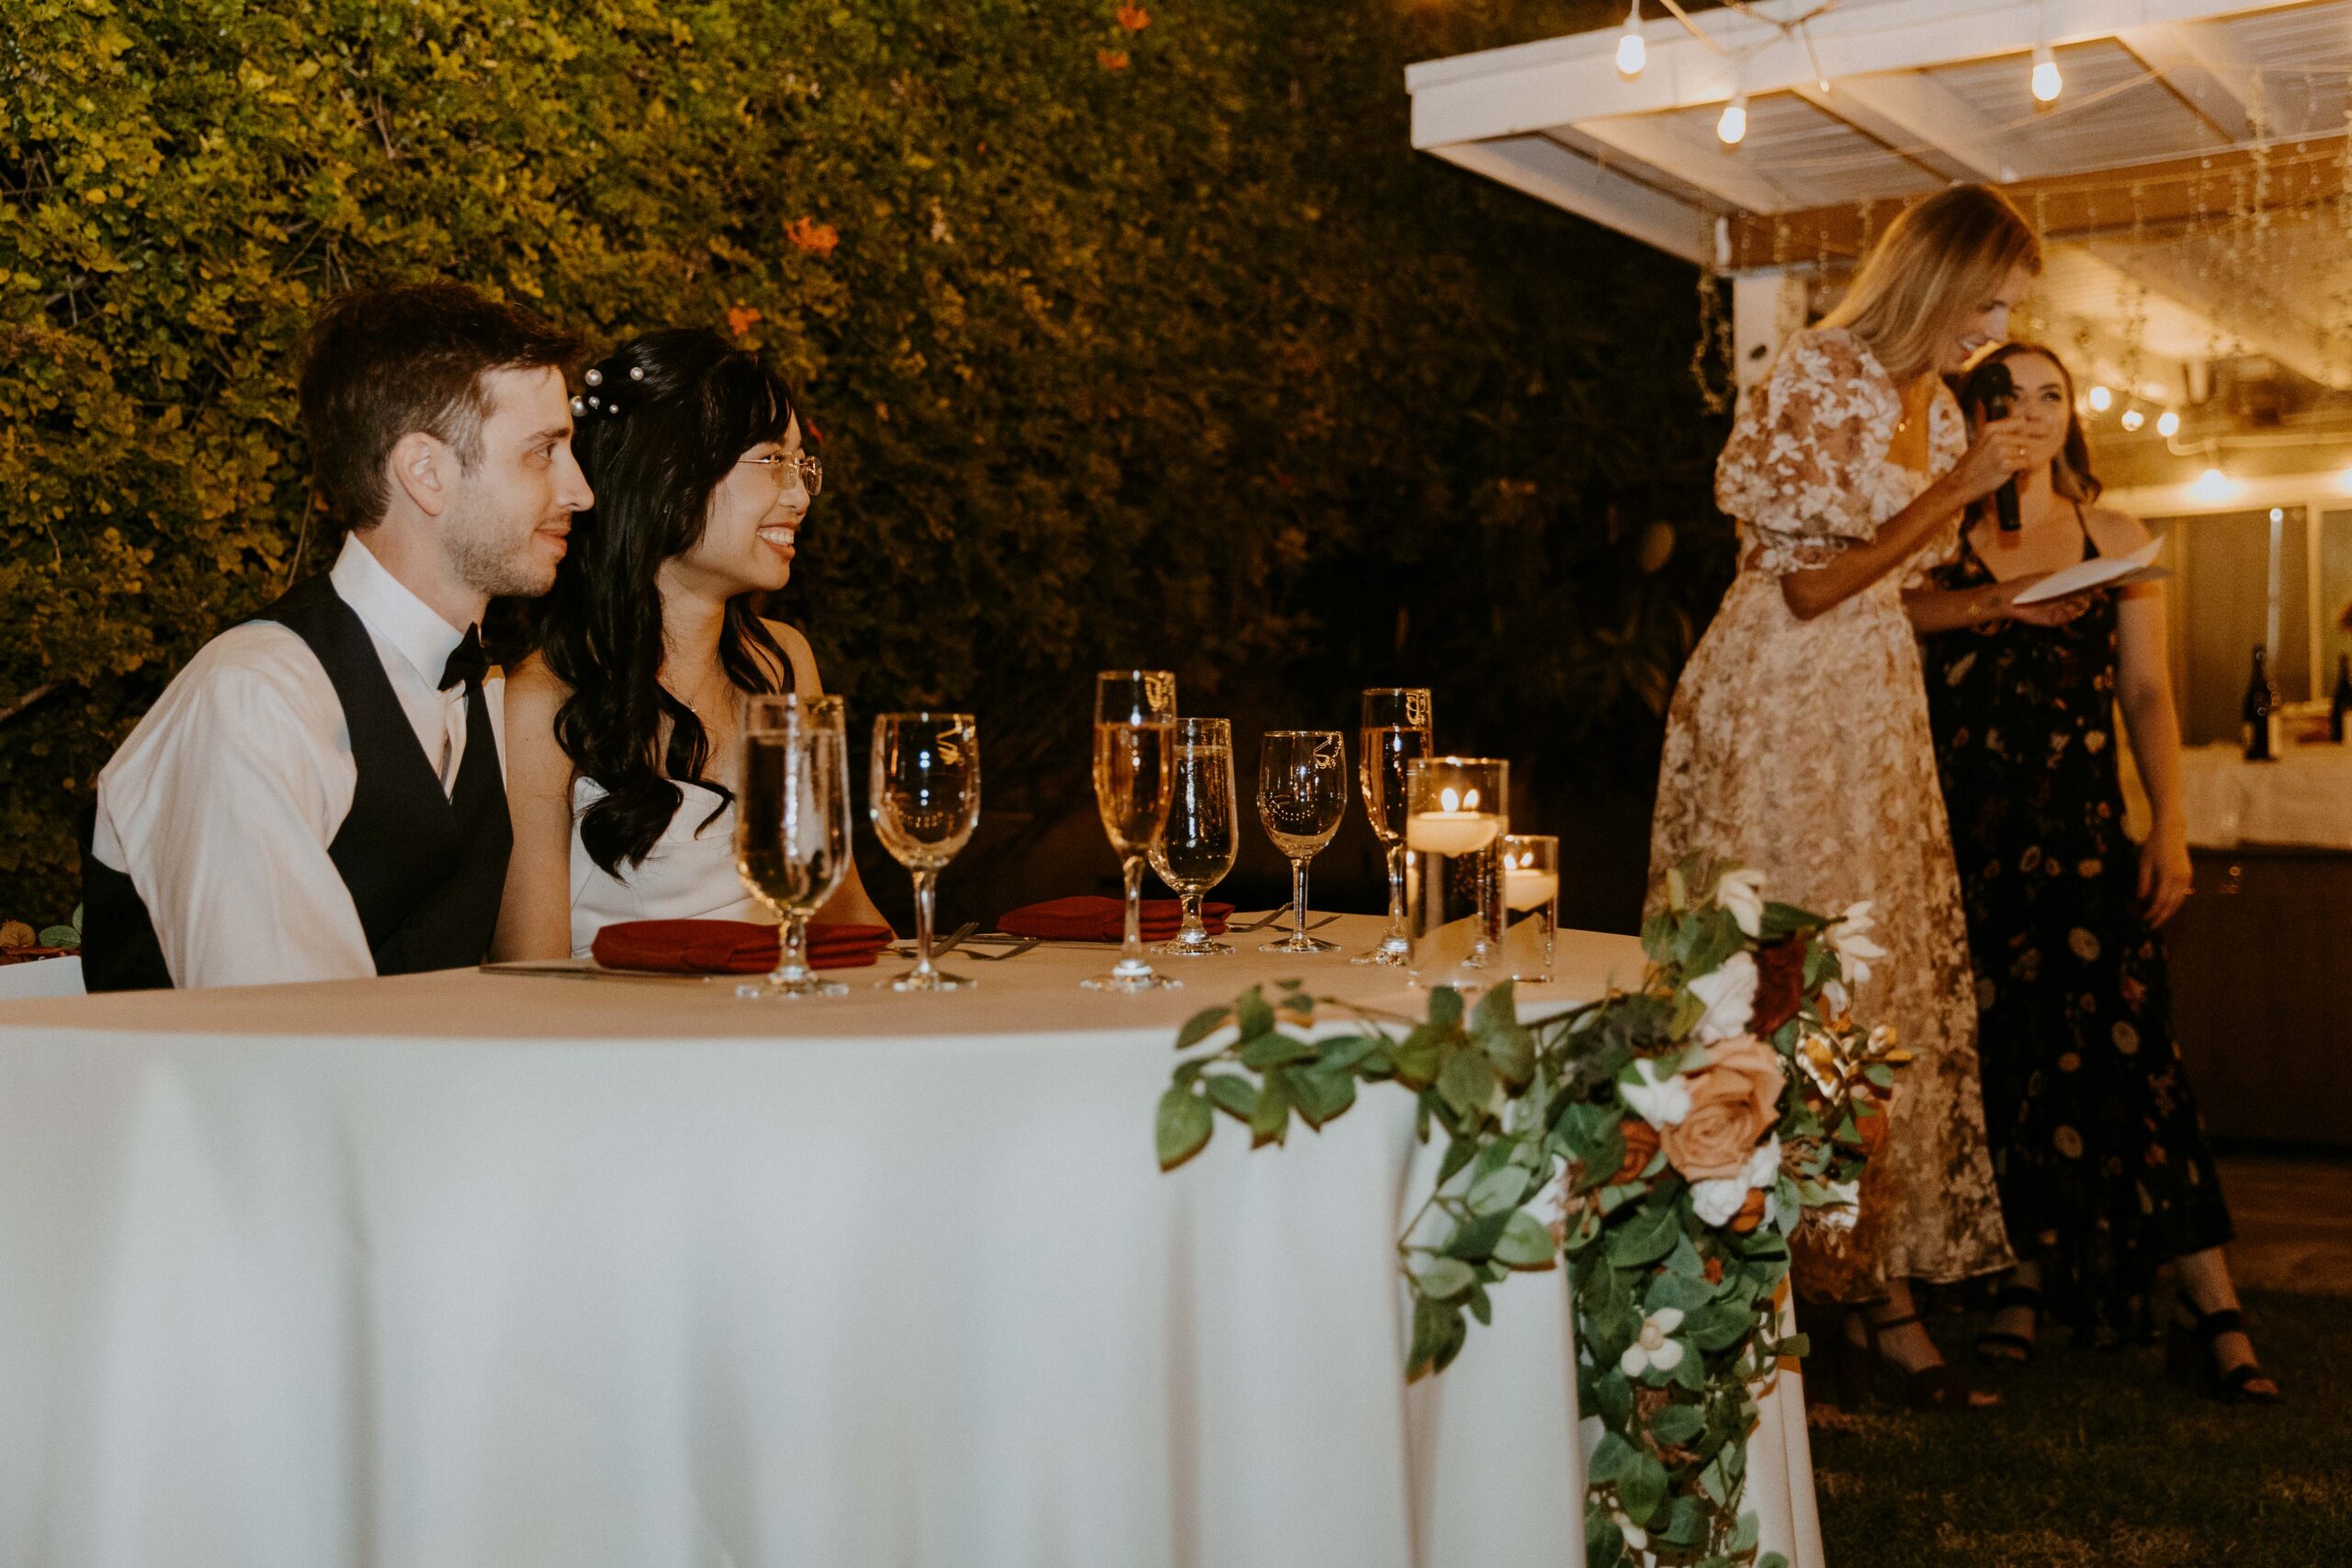 An outdoor wedding gathering with the couple sitting at their head table